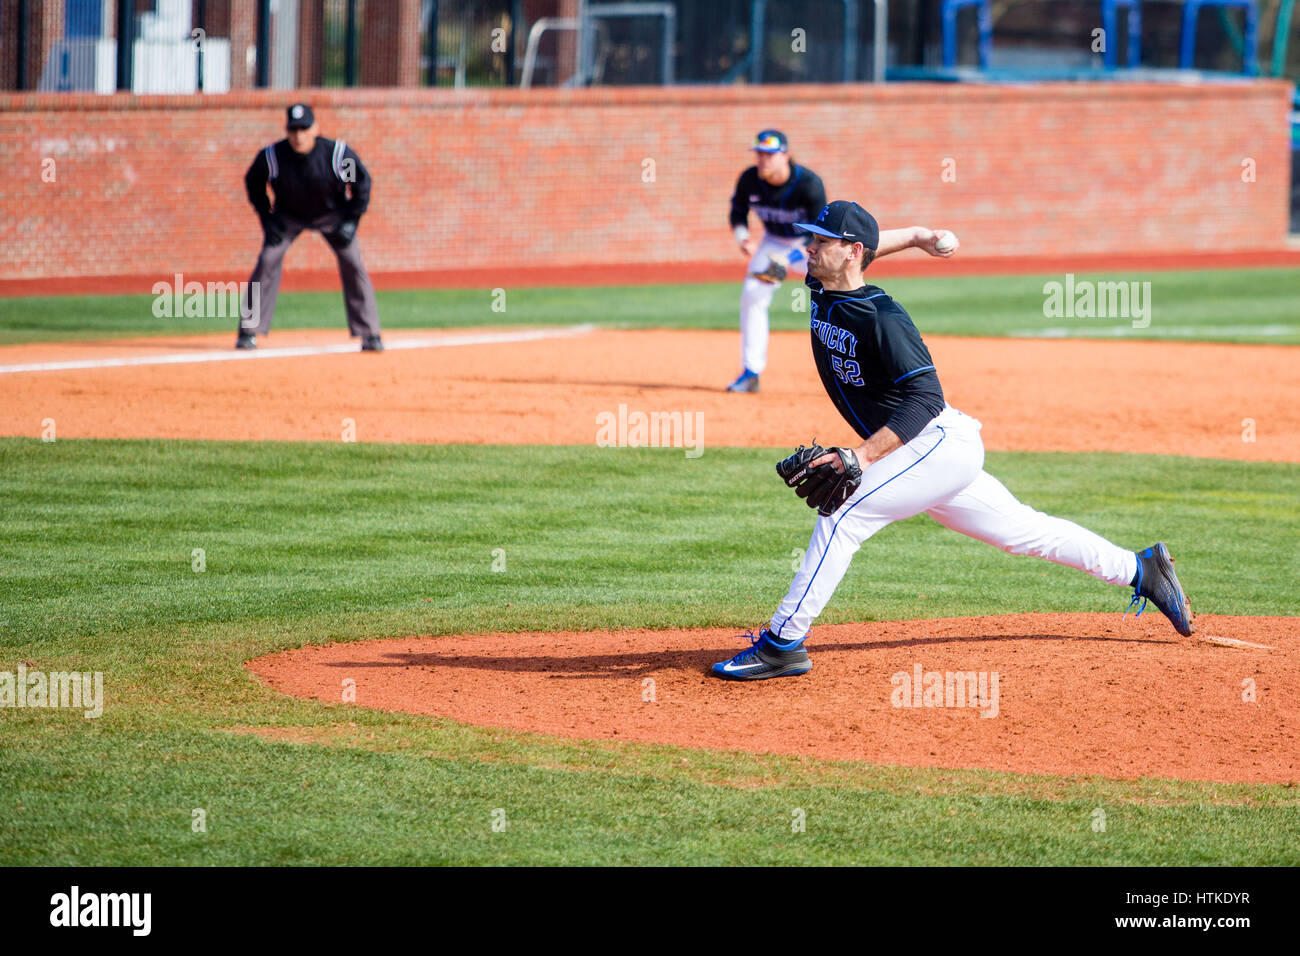 LEXINGTON, KY - MARCH 12: University of Kentucky right handed pitcher Zach Pop (#52) was brought in for the late innings during game play between the Miami University Redhawks and the University of Kentucky Wildcats. (Photo by Mat Gdowski/Icon Sportswire) Stock Photo